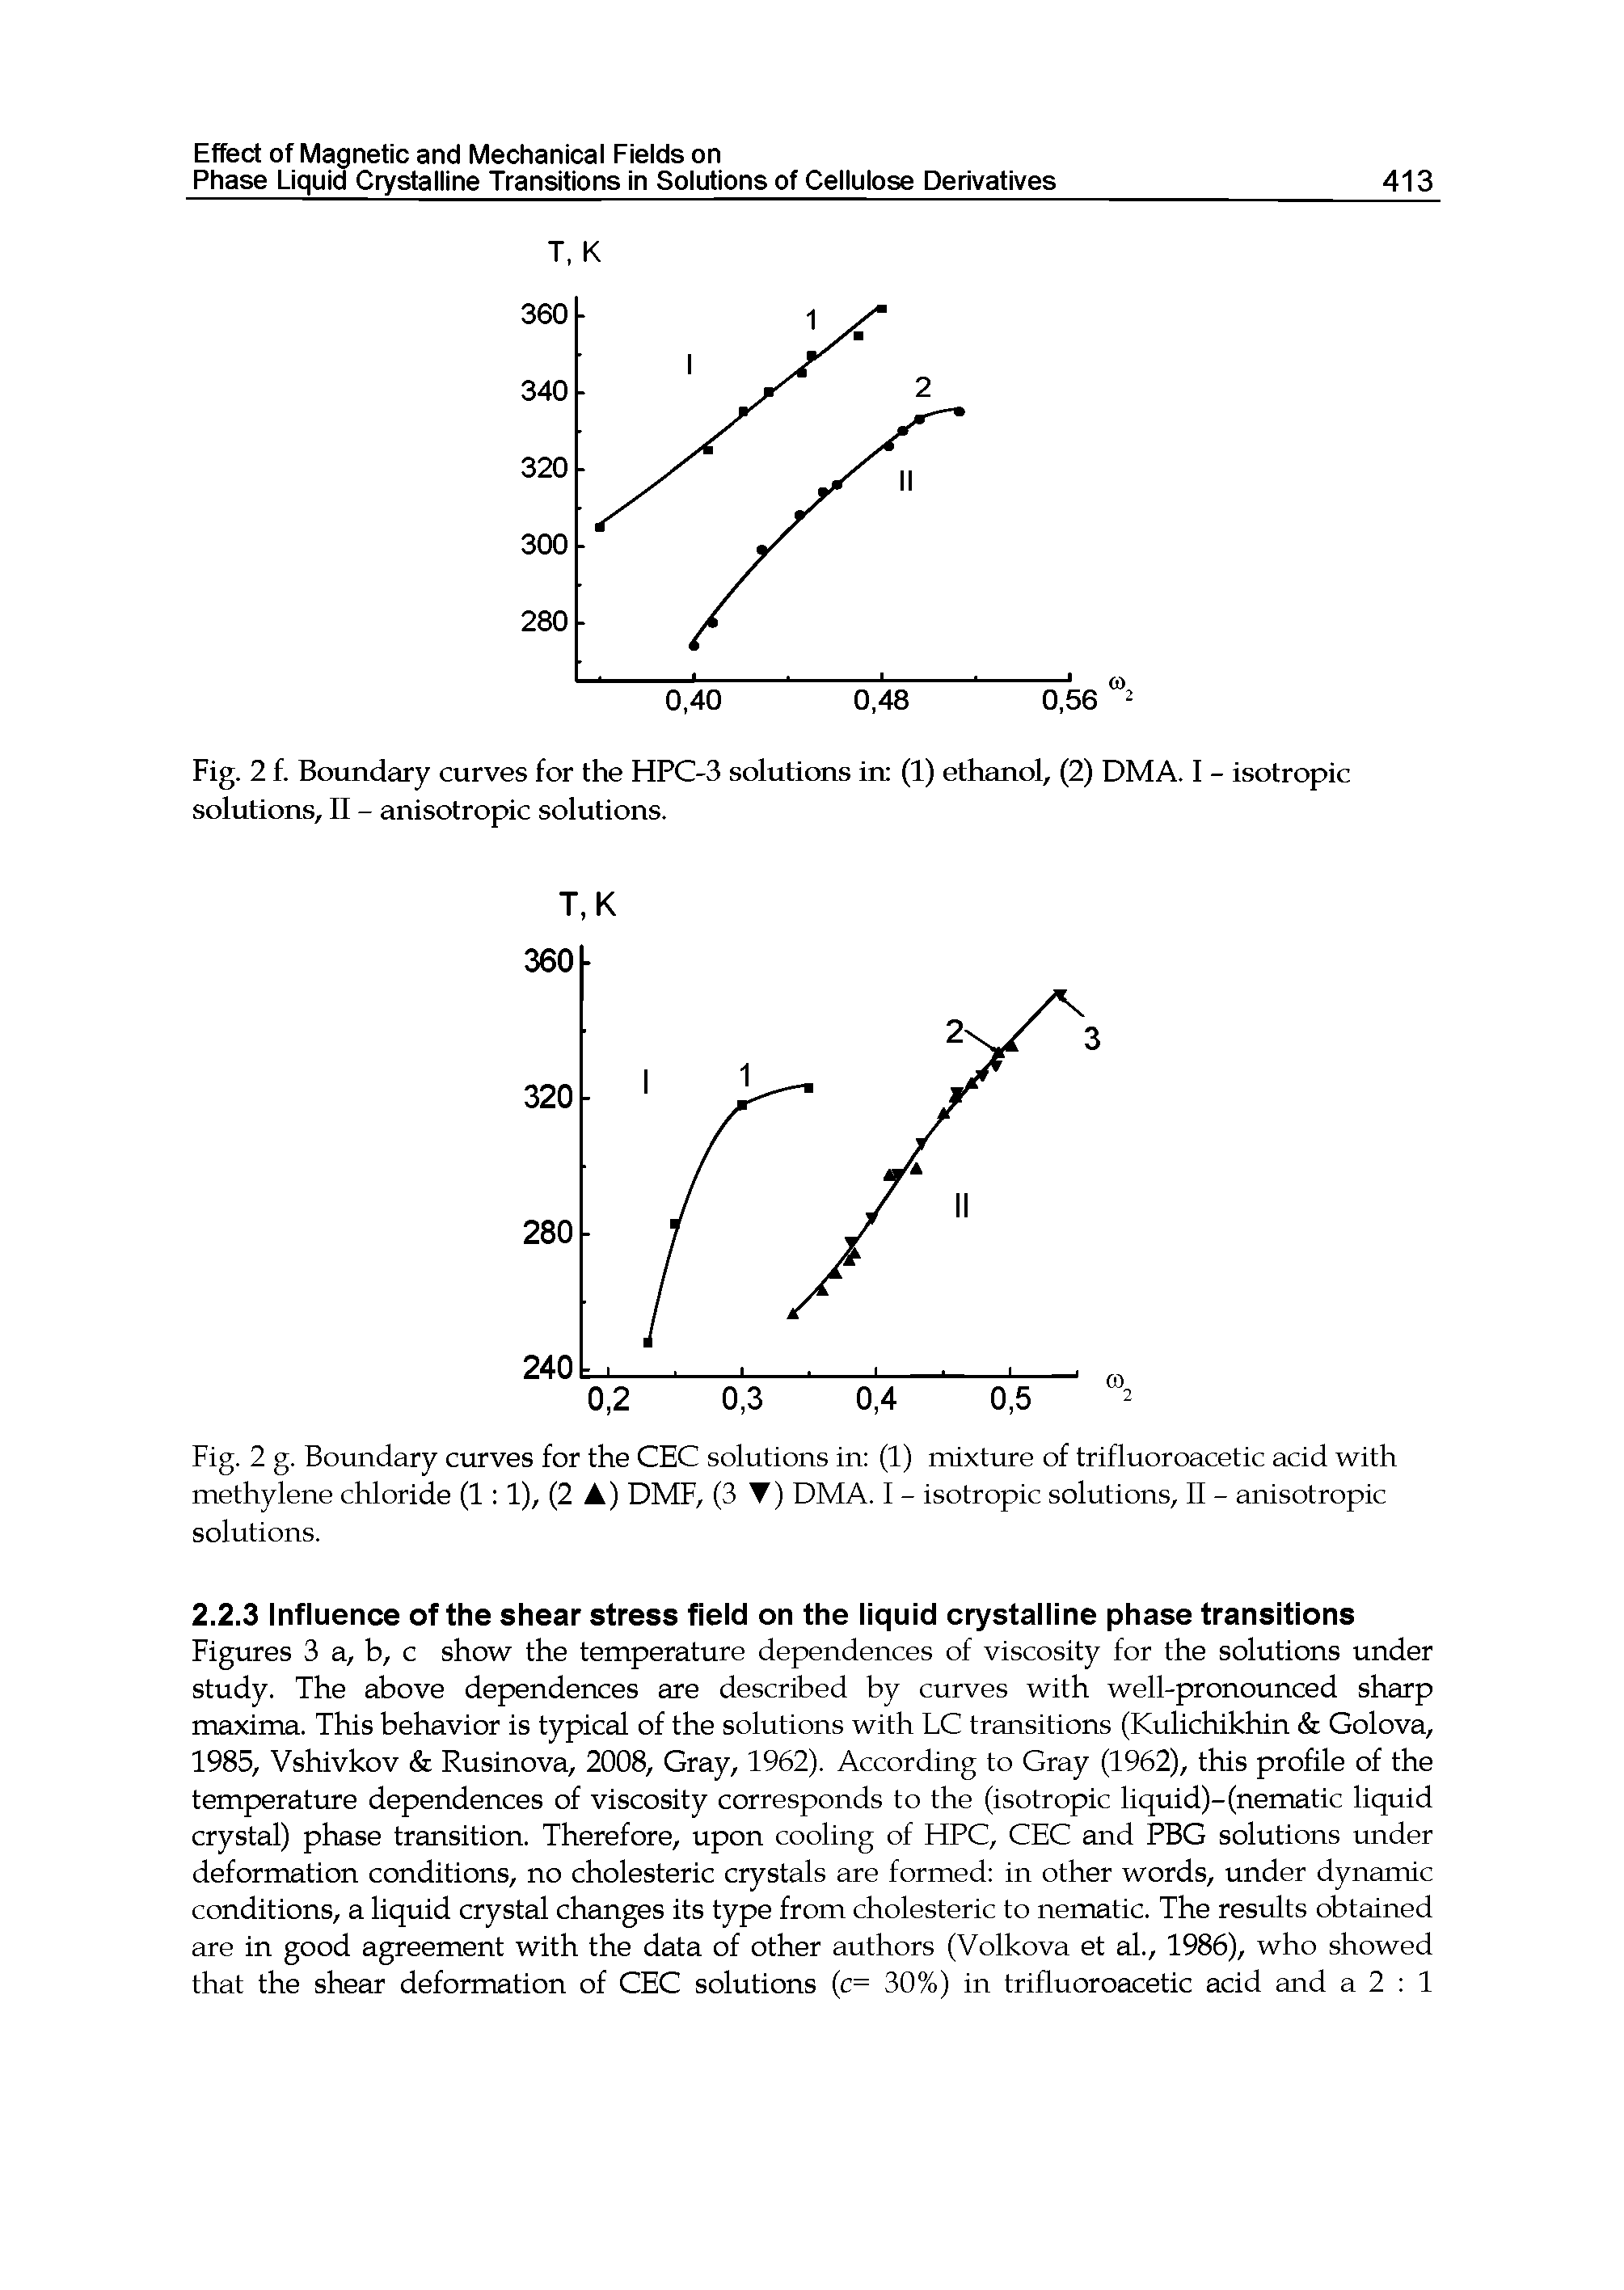 Figures 3 a, b, c show the temperature dependences of viscosity for the solutions under study. The above dependences are described by curves with well-pronounced sharp maxima. This behavior is typical of the solutions with LC transitions (Kulichikhin Golova, 1985, Vshivkov Rusinova, 2008, Gray, 1962). According to Gray (1962), this profile of the temperature dependences of viscosity corresponds to the (isotropic liquid)-(nematic liquid crystal) phase transition. Therefore, upon cooling of HPC, CEC and PBG solutions under deformation conditions, no cholesteric crystals are formed in other words, under dynamic conditions, a liquid crystal changes its type from cholesteric to nematic. The results obtained are in good agreement with the data of other authors (Volkova et al., 1986), who showed that the shear deformation of CEC solutions (c= 30%) in trifluoroacetic acid and a 2 1...